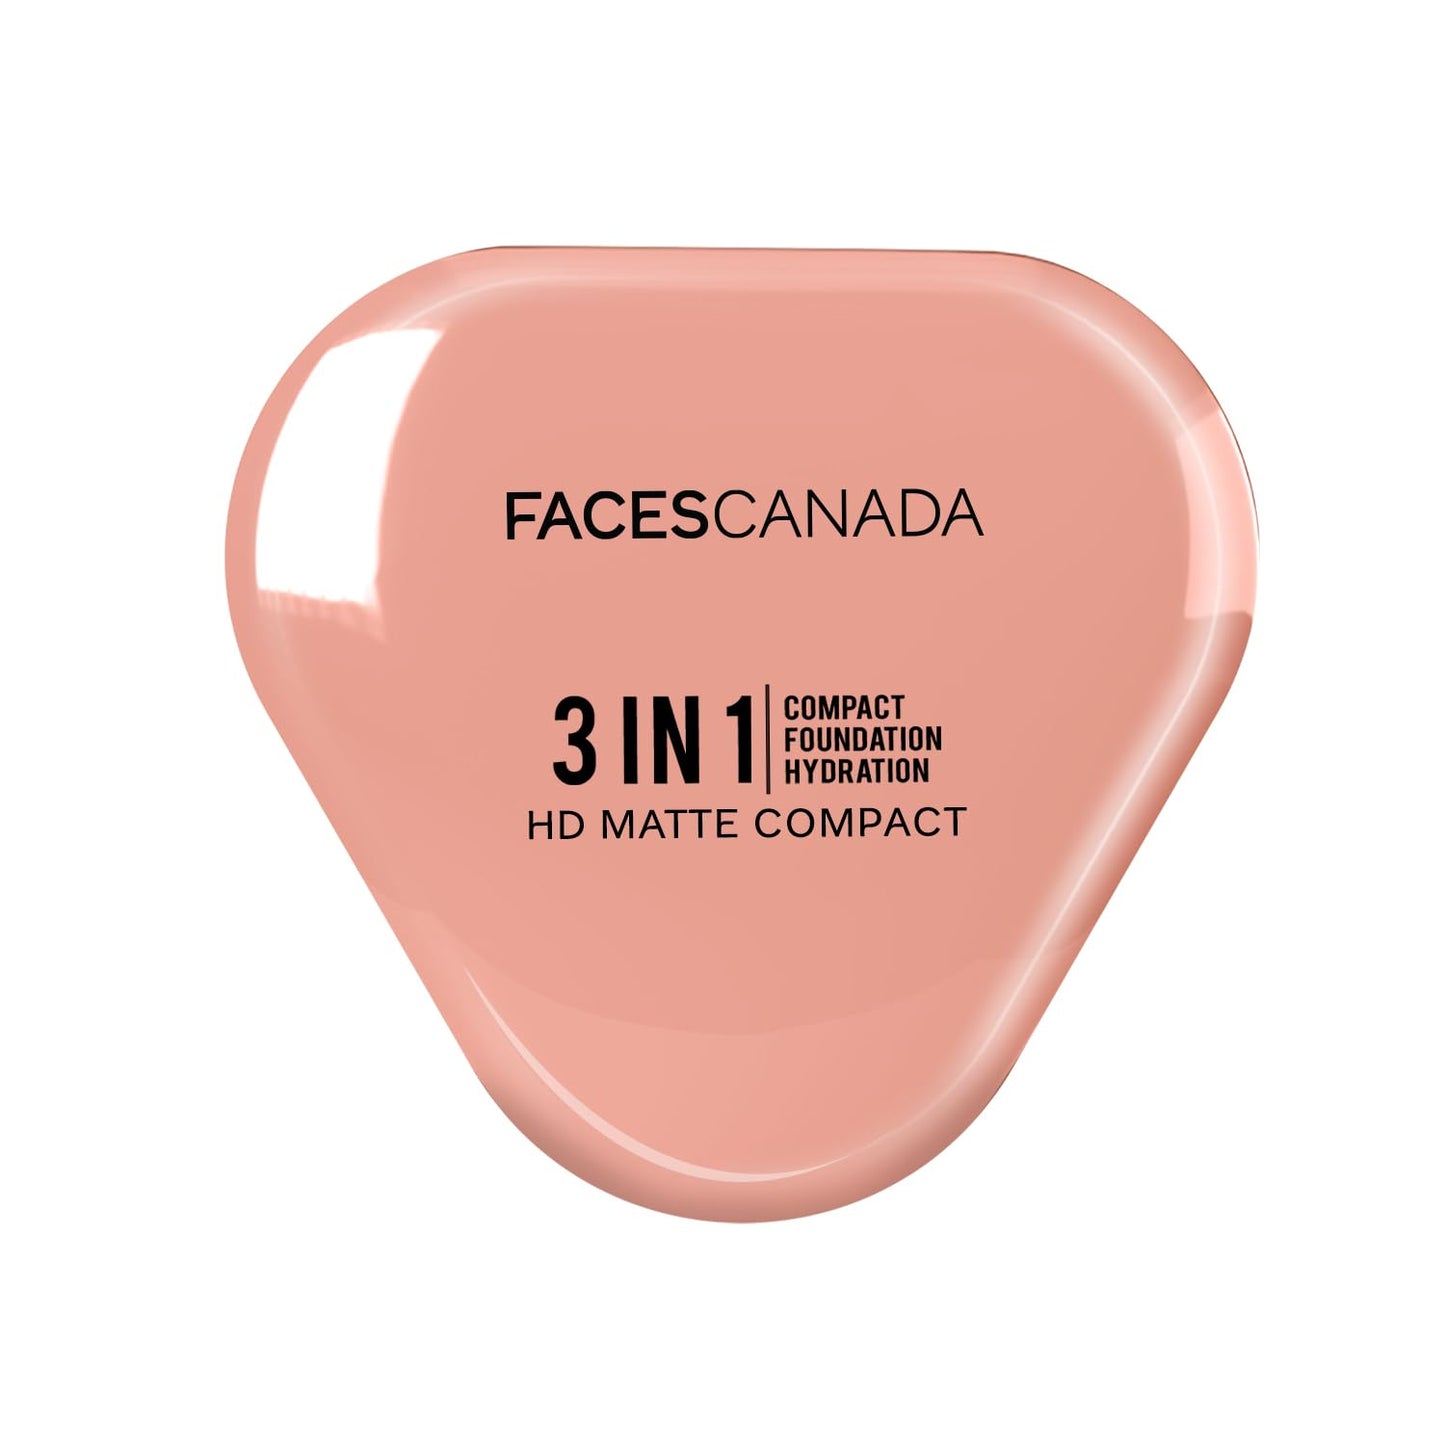 FACES CANADA 3 in 1 HD Matte Compact